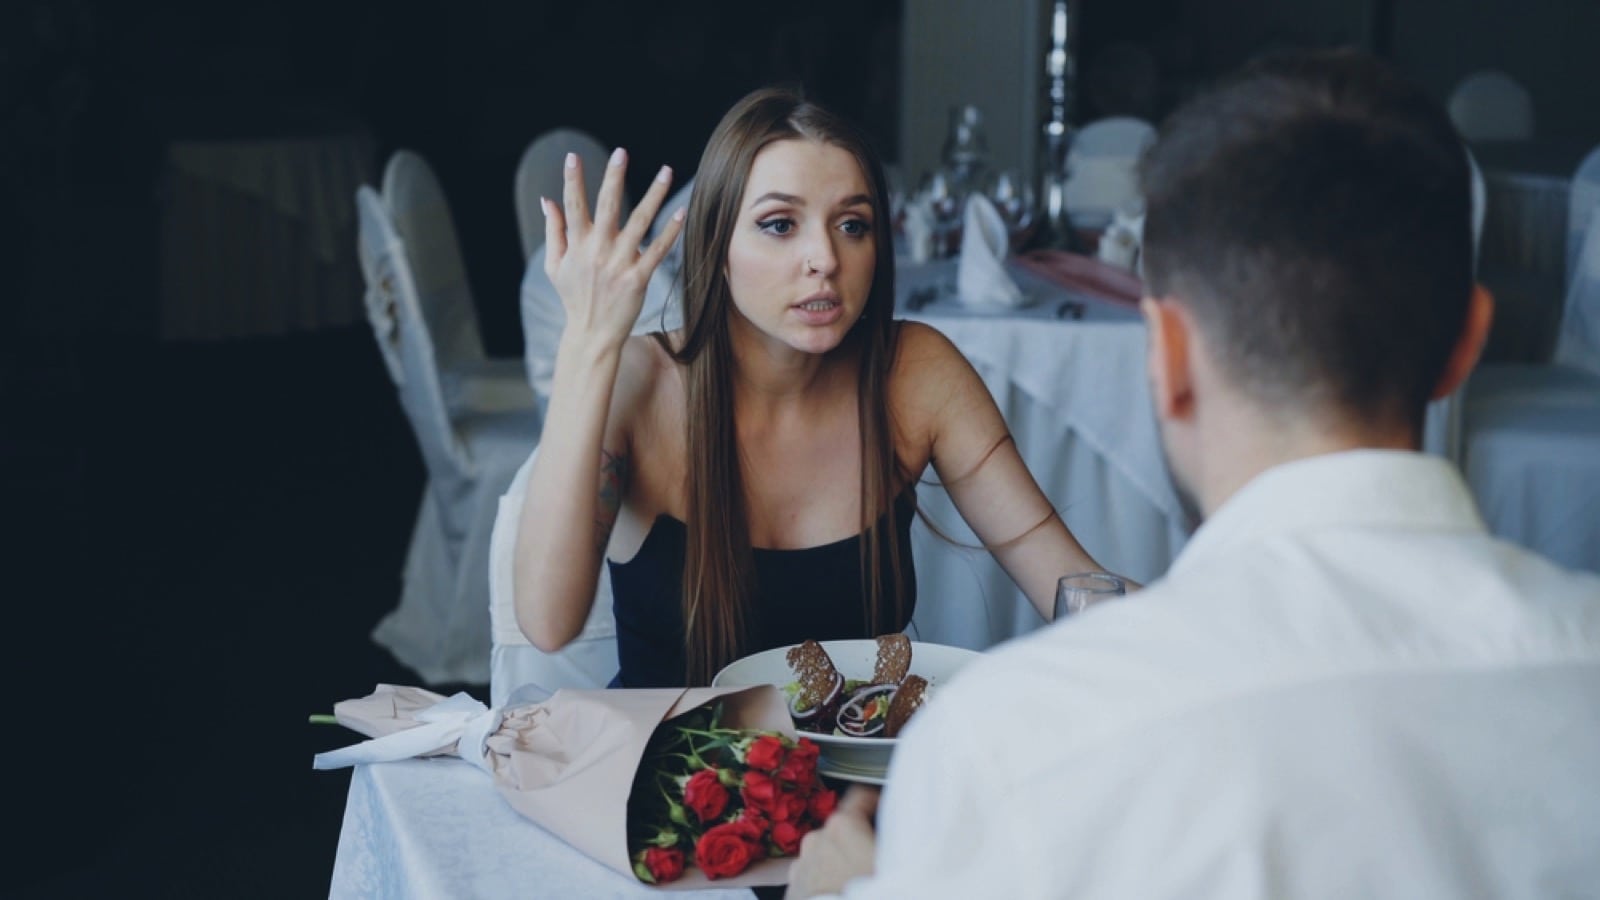 Woman arguing with partner